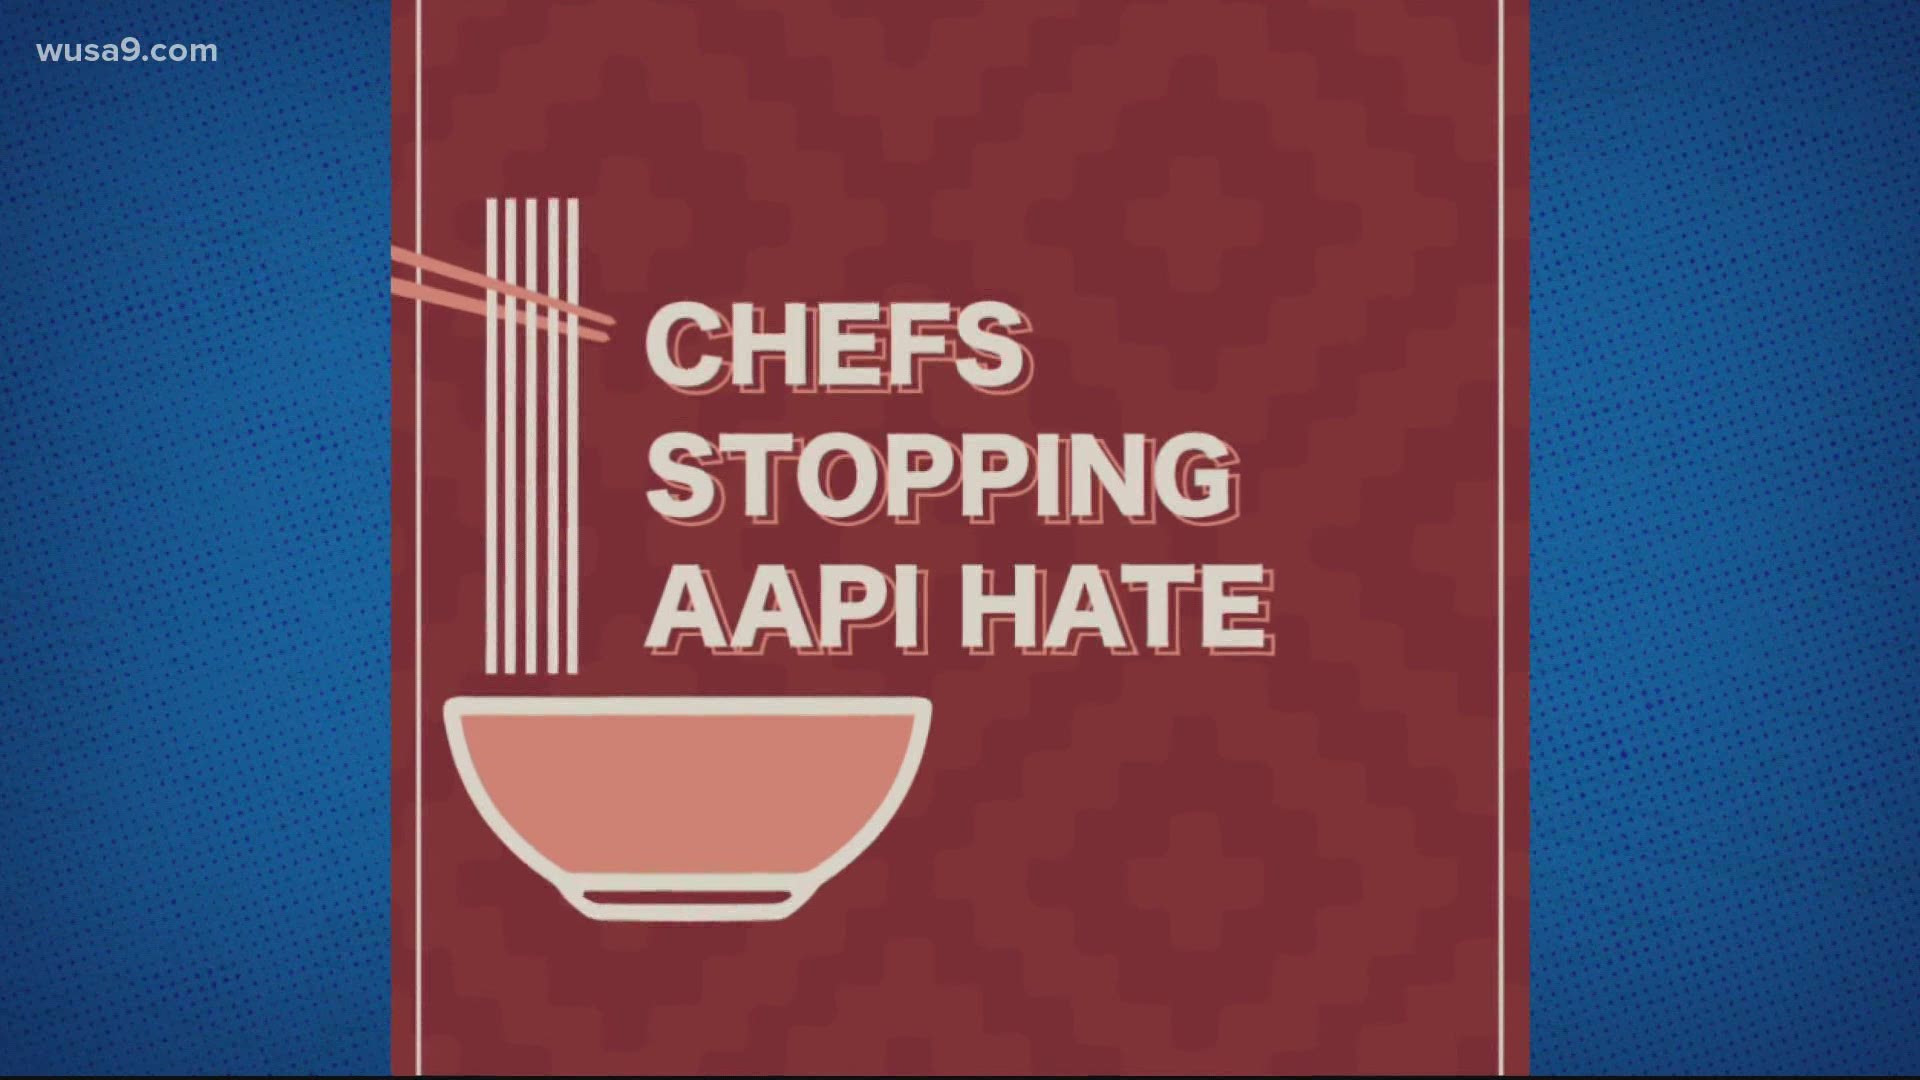 The month-long takeout dinner series helps raise money for Stop AAPI Hate